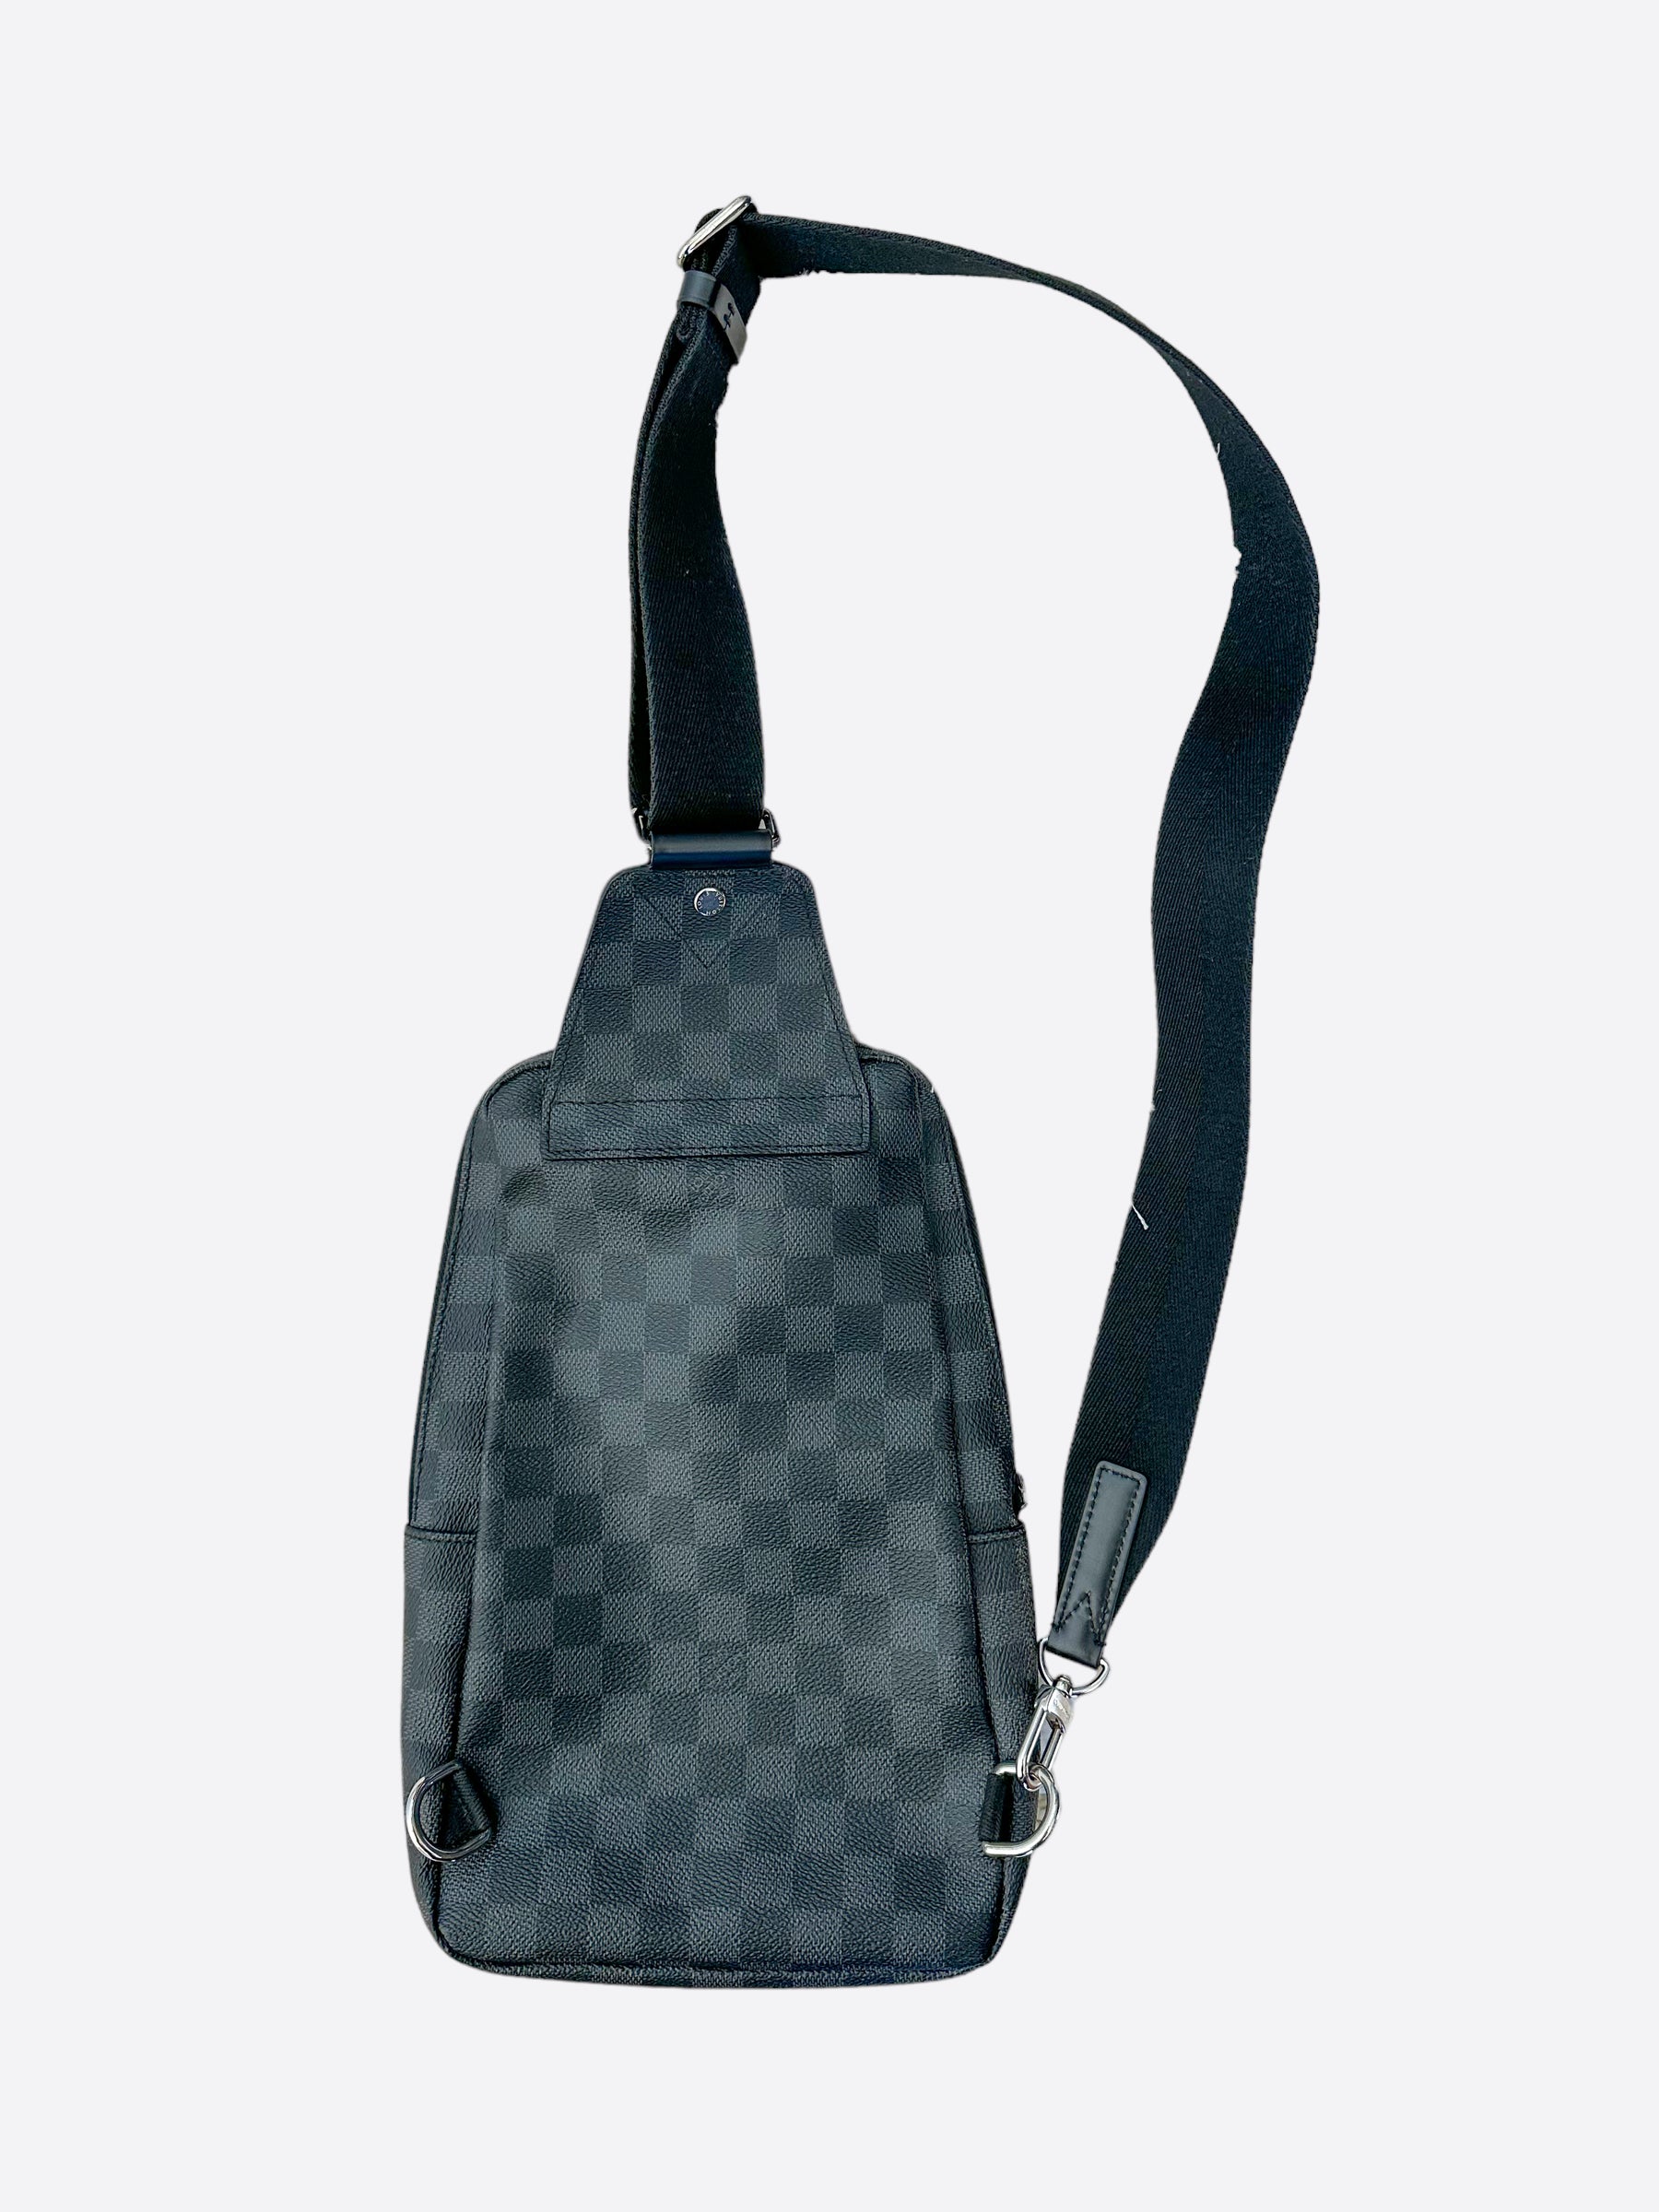 Louis Vuitton Avenue Slingbag In Damier Graphite - clothing & accessories -  by owner - apparel sale - craigslist